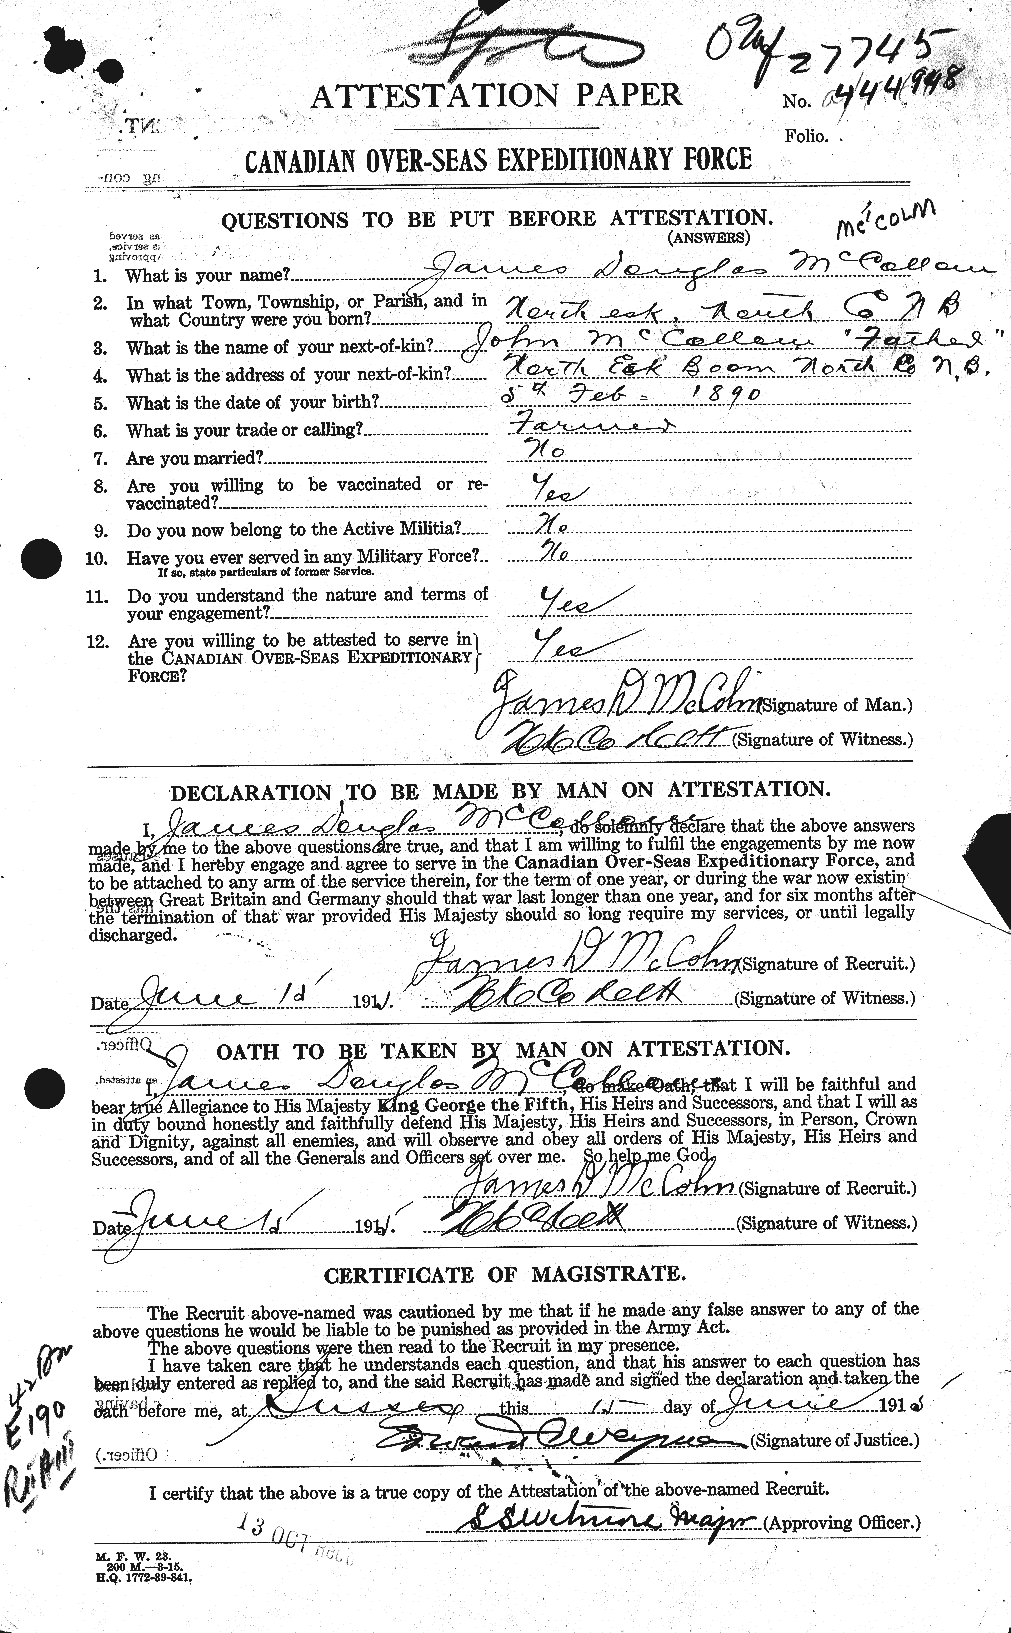 Personnel Records of the First World War - CEF 133327a